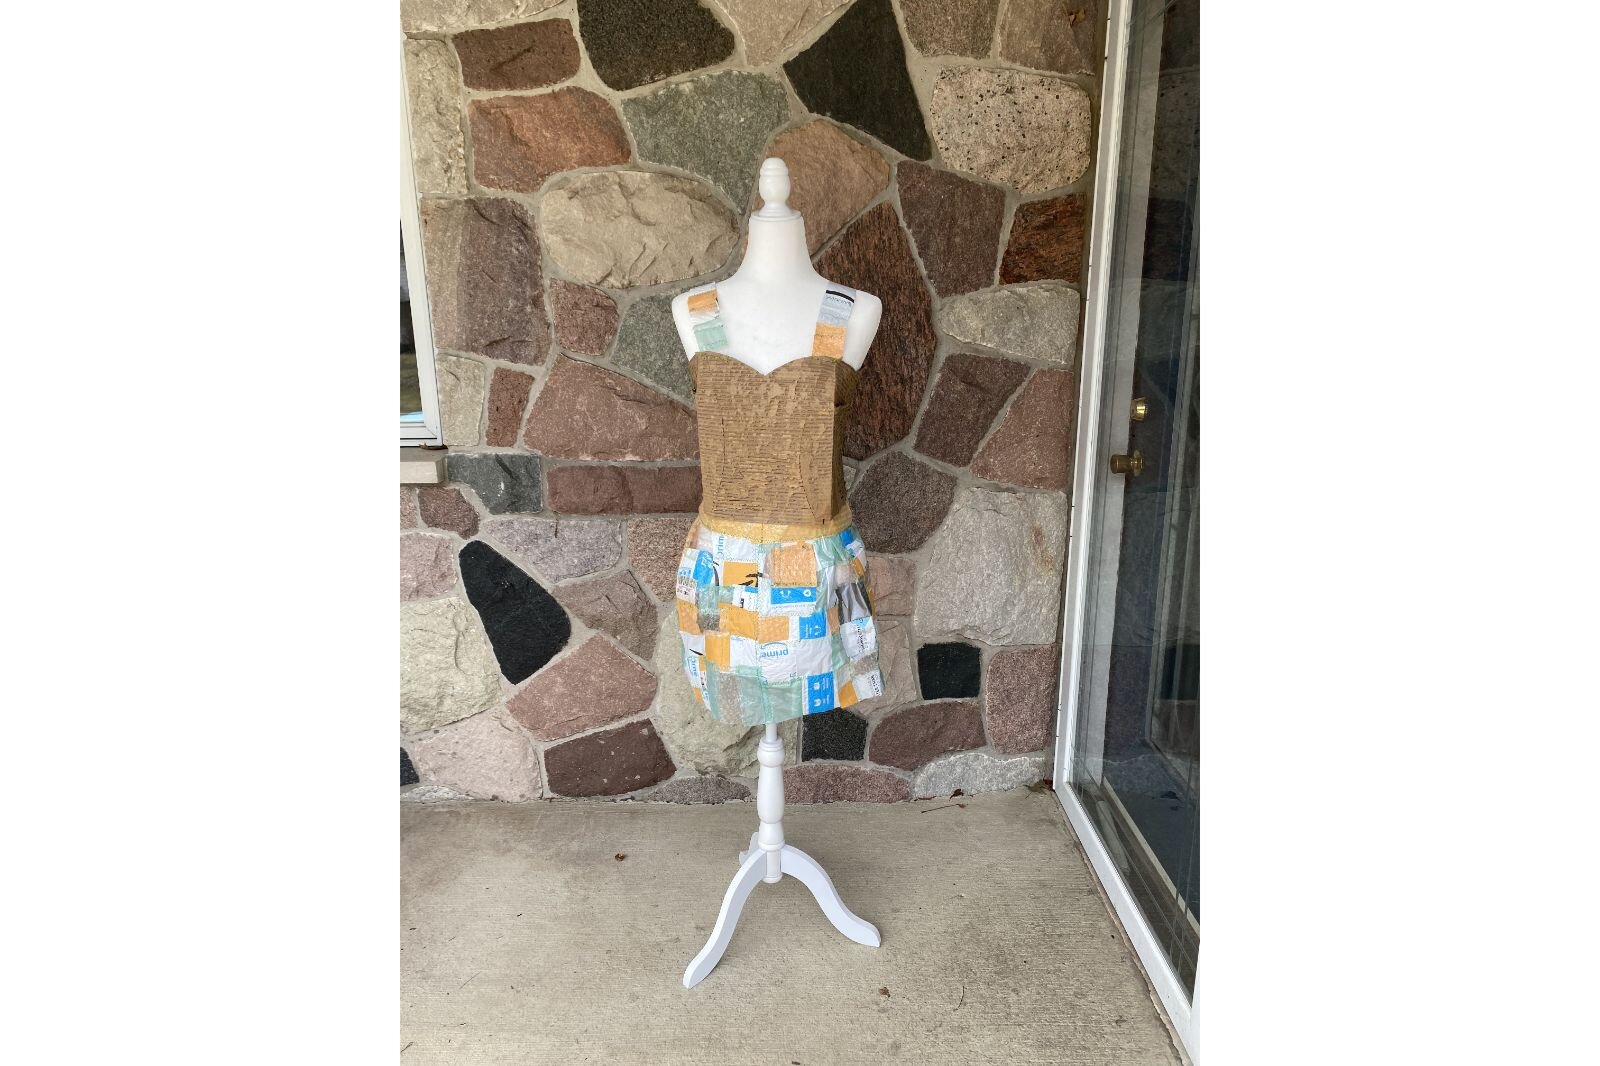  The finished “Plastic Patchwork Packing Dress” is appropriately showcased on a doorstep where a package might land.